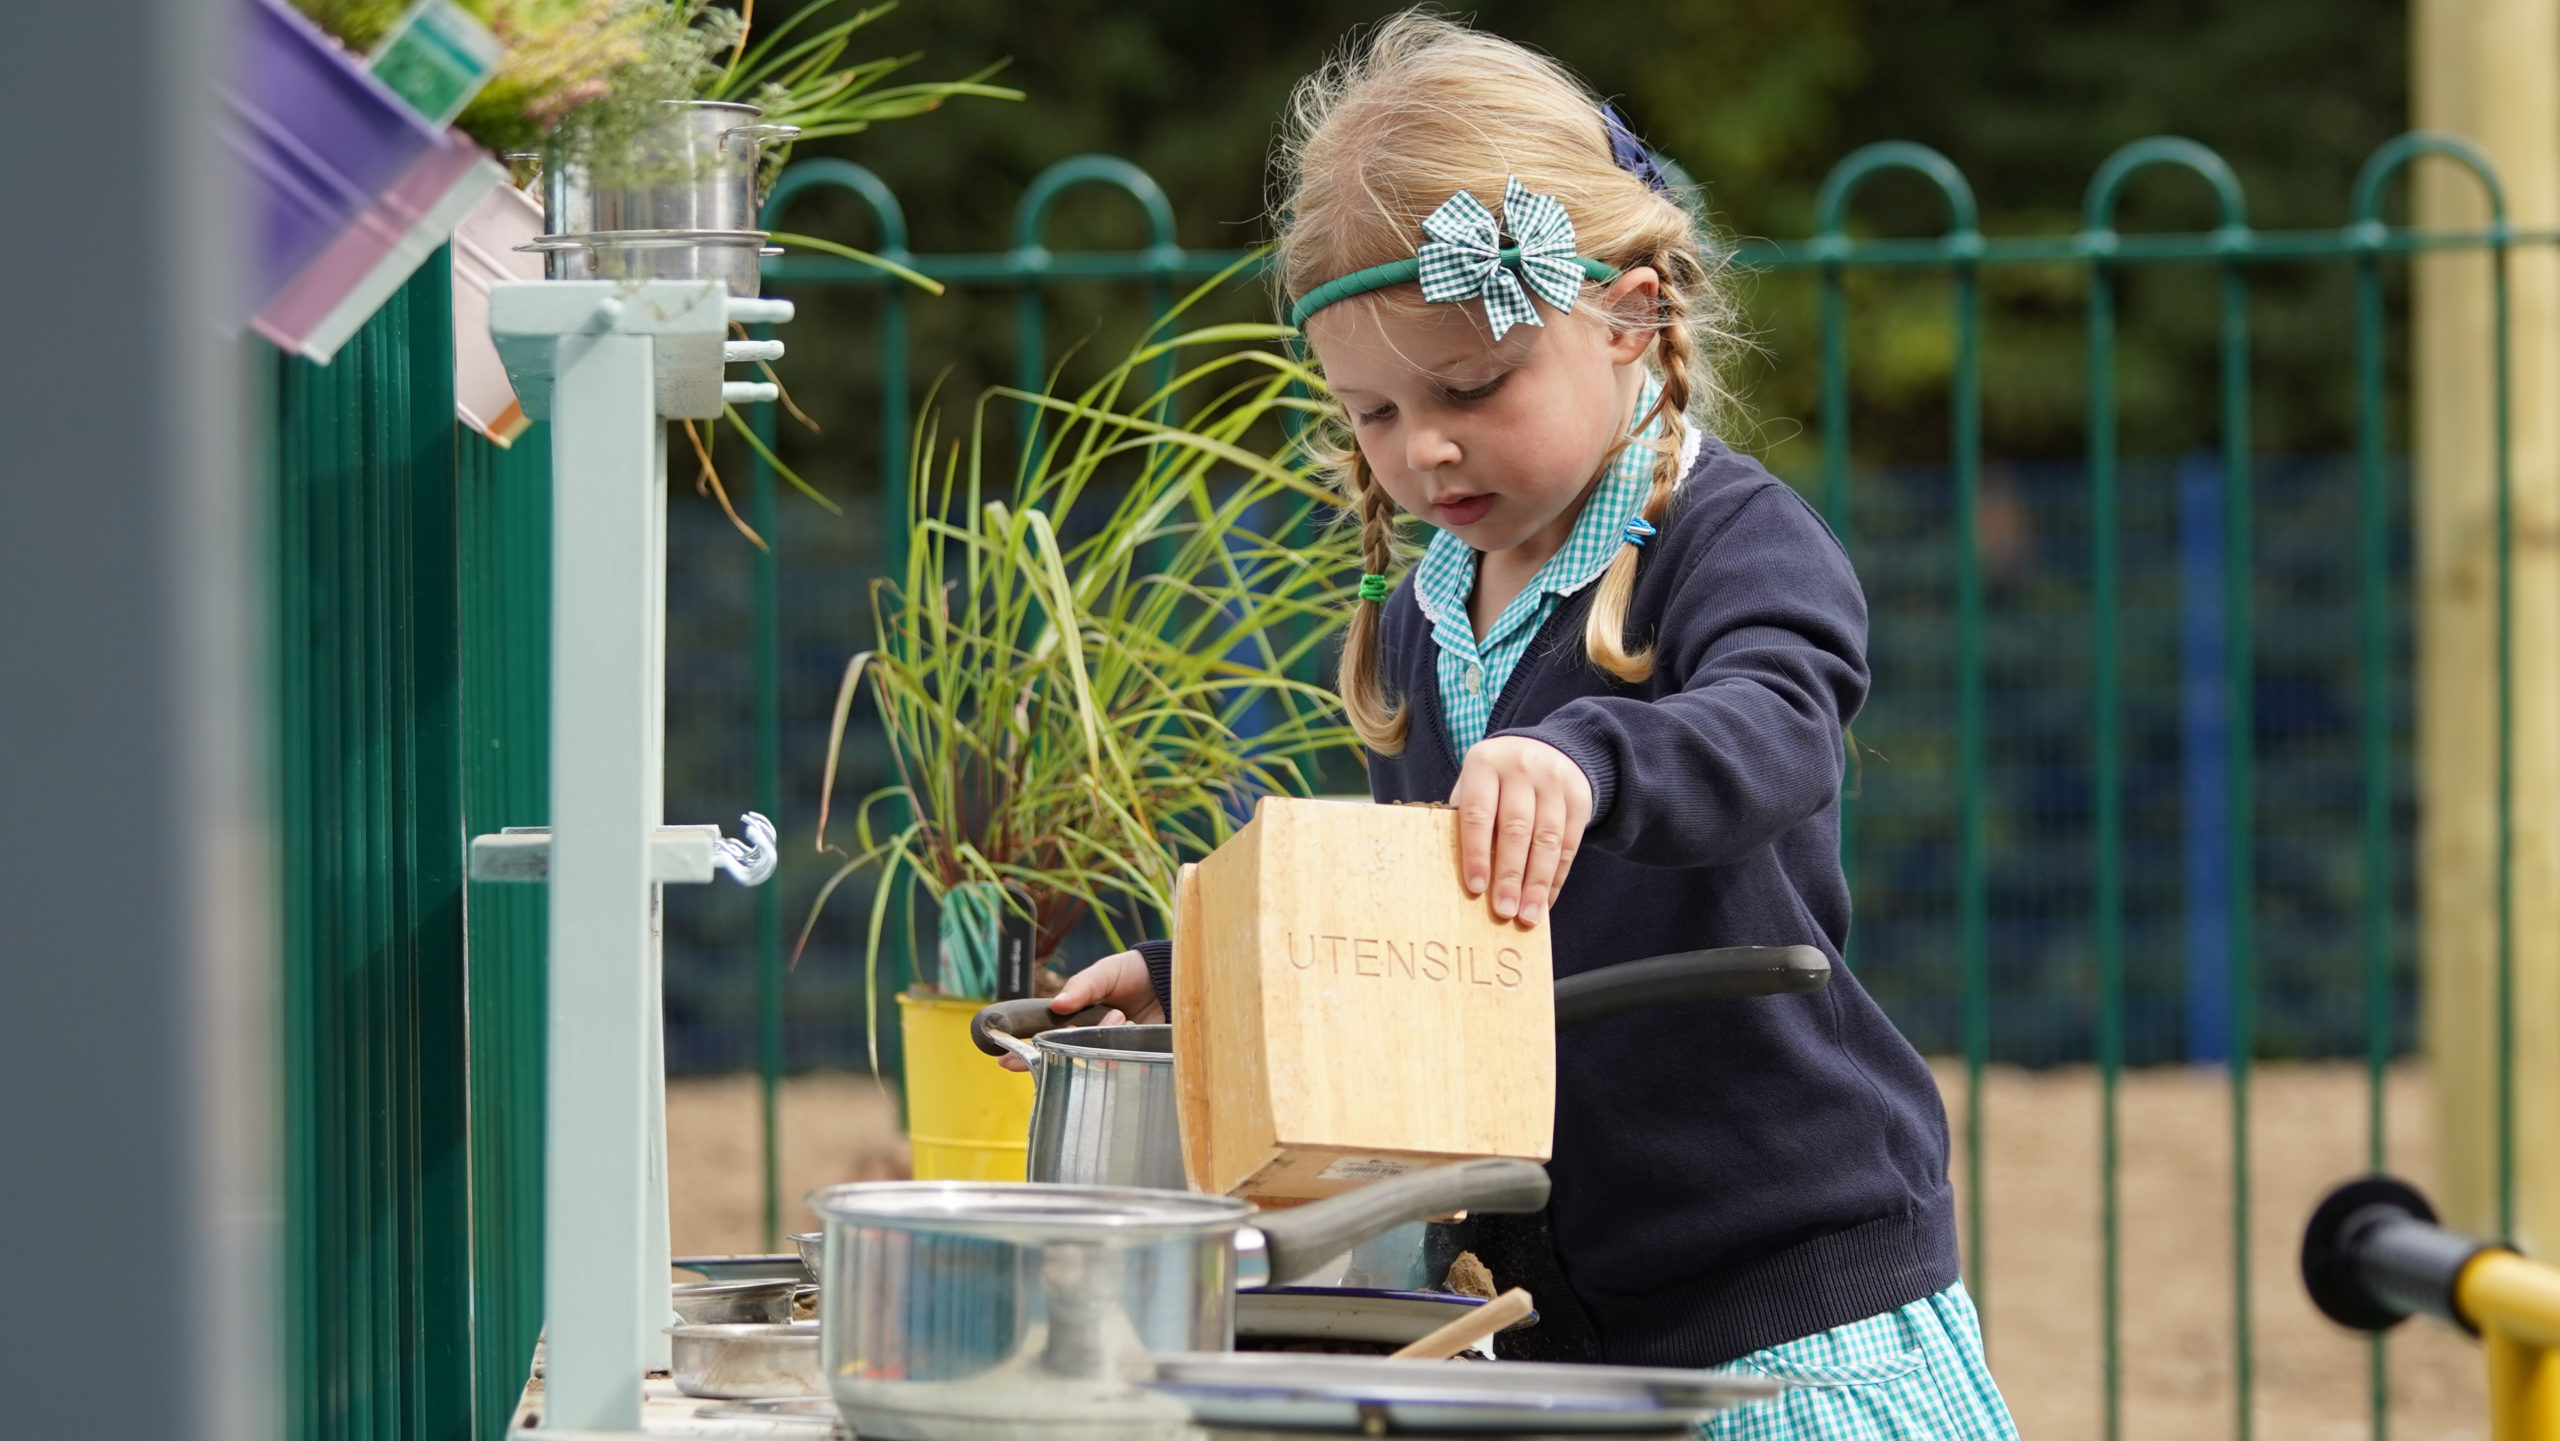 A young girl with blonde hair is seen interacting with some cooking utensils in an outdoor play area on the academy grounds.